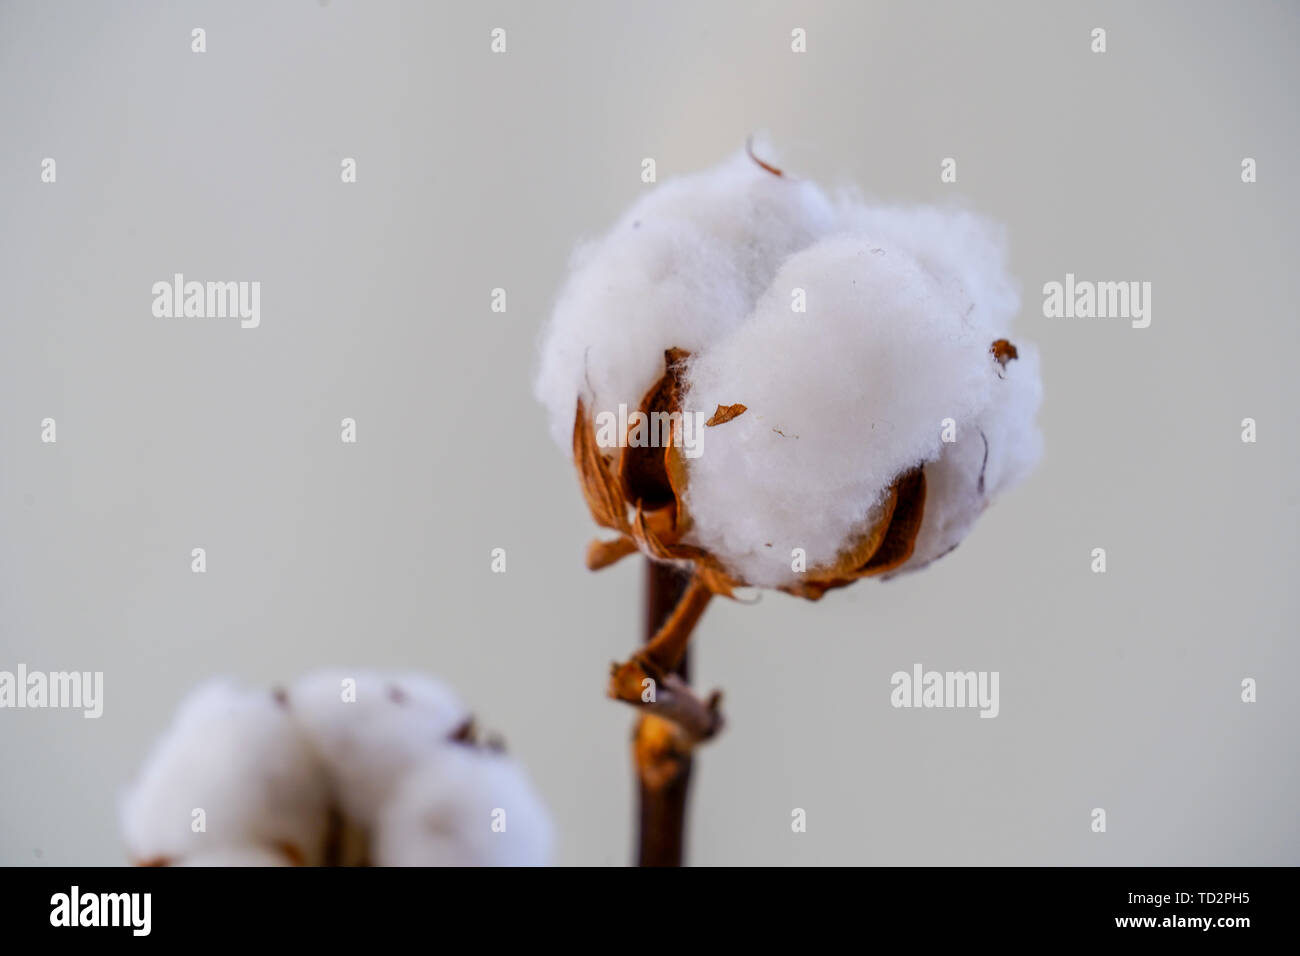 Cotton is a soft, fluffy staple fiber that grows in a boll, or protective capsule, around the seeds of cotton plants of the genus Gossypium. The fiber Stock Photo